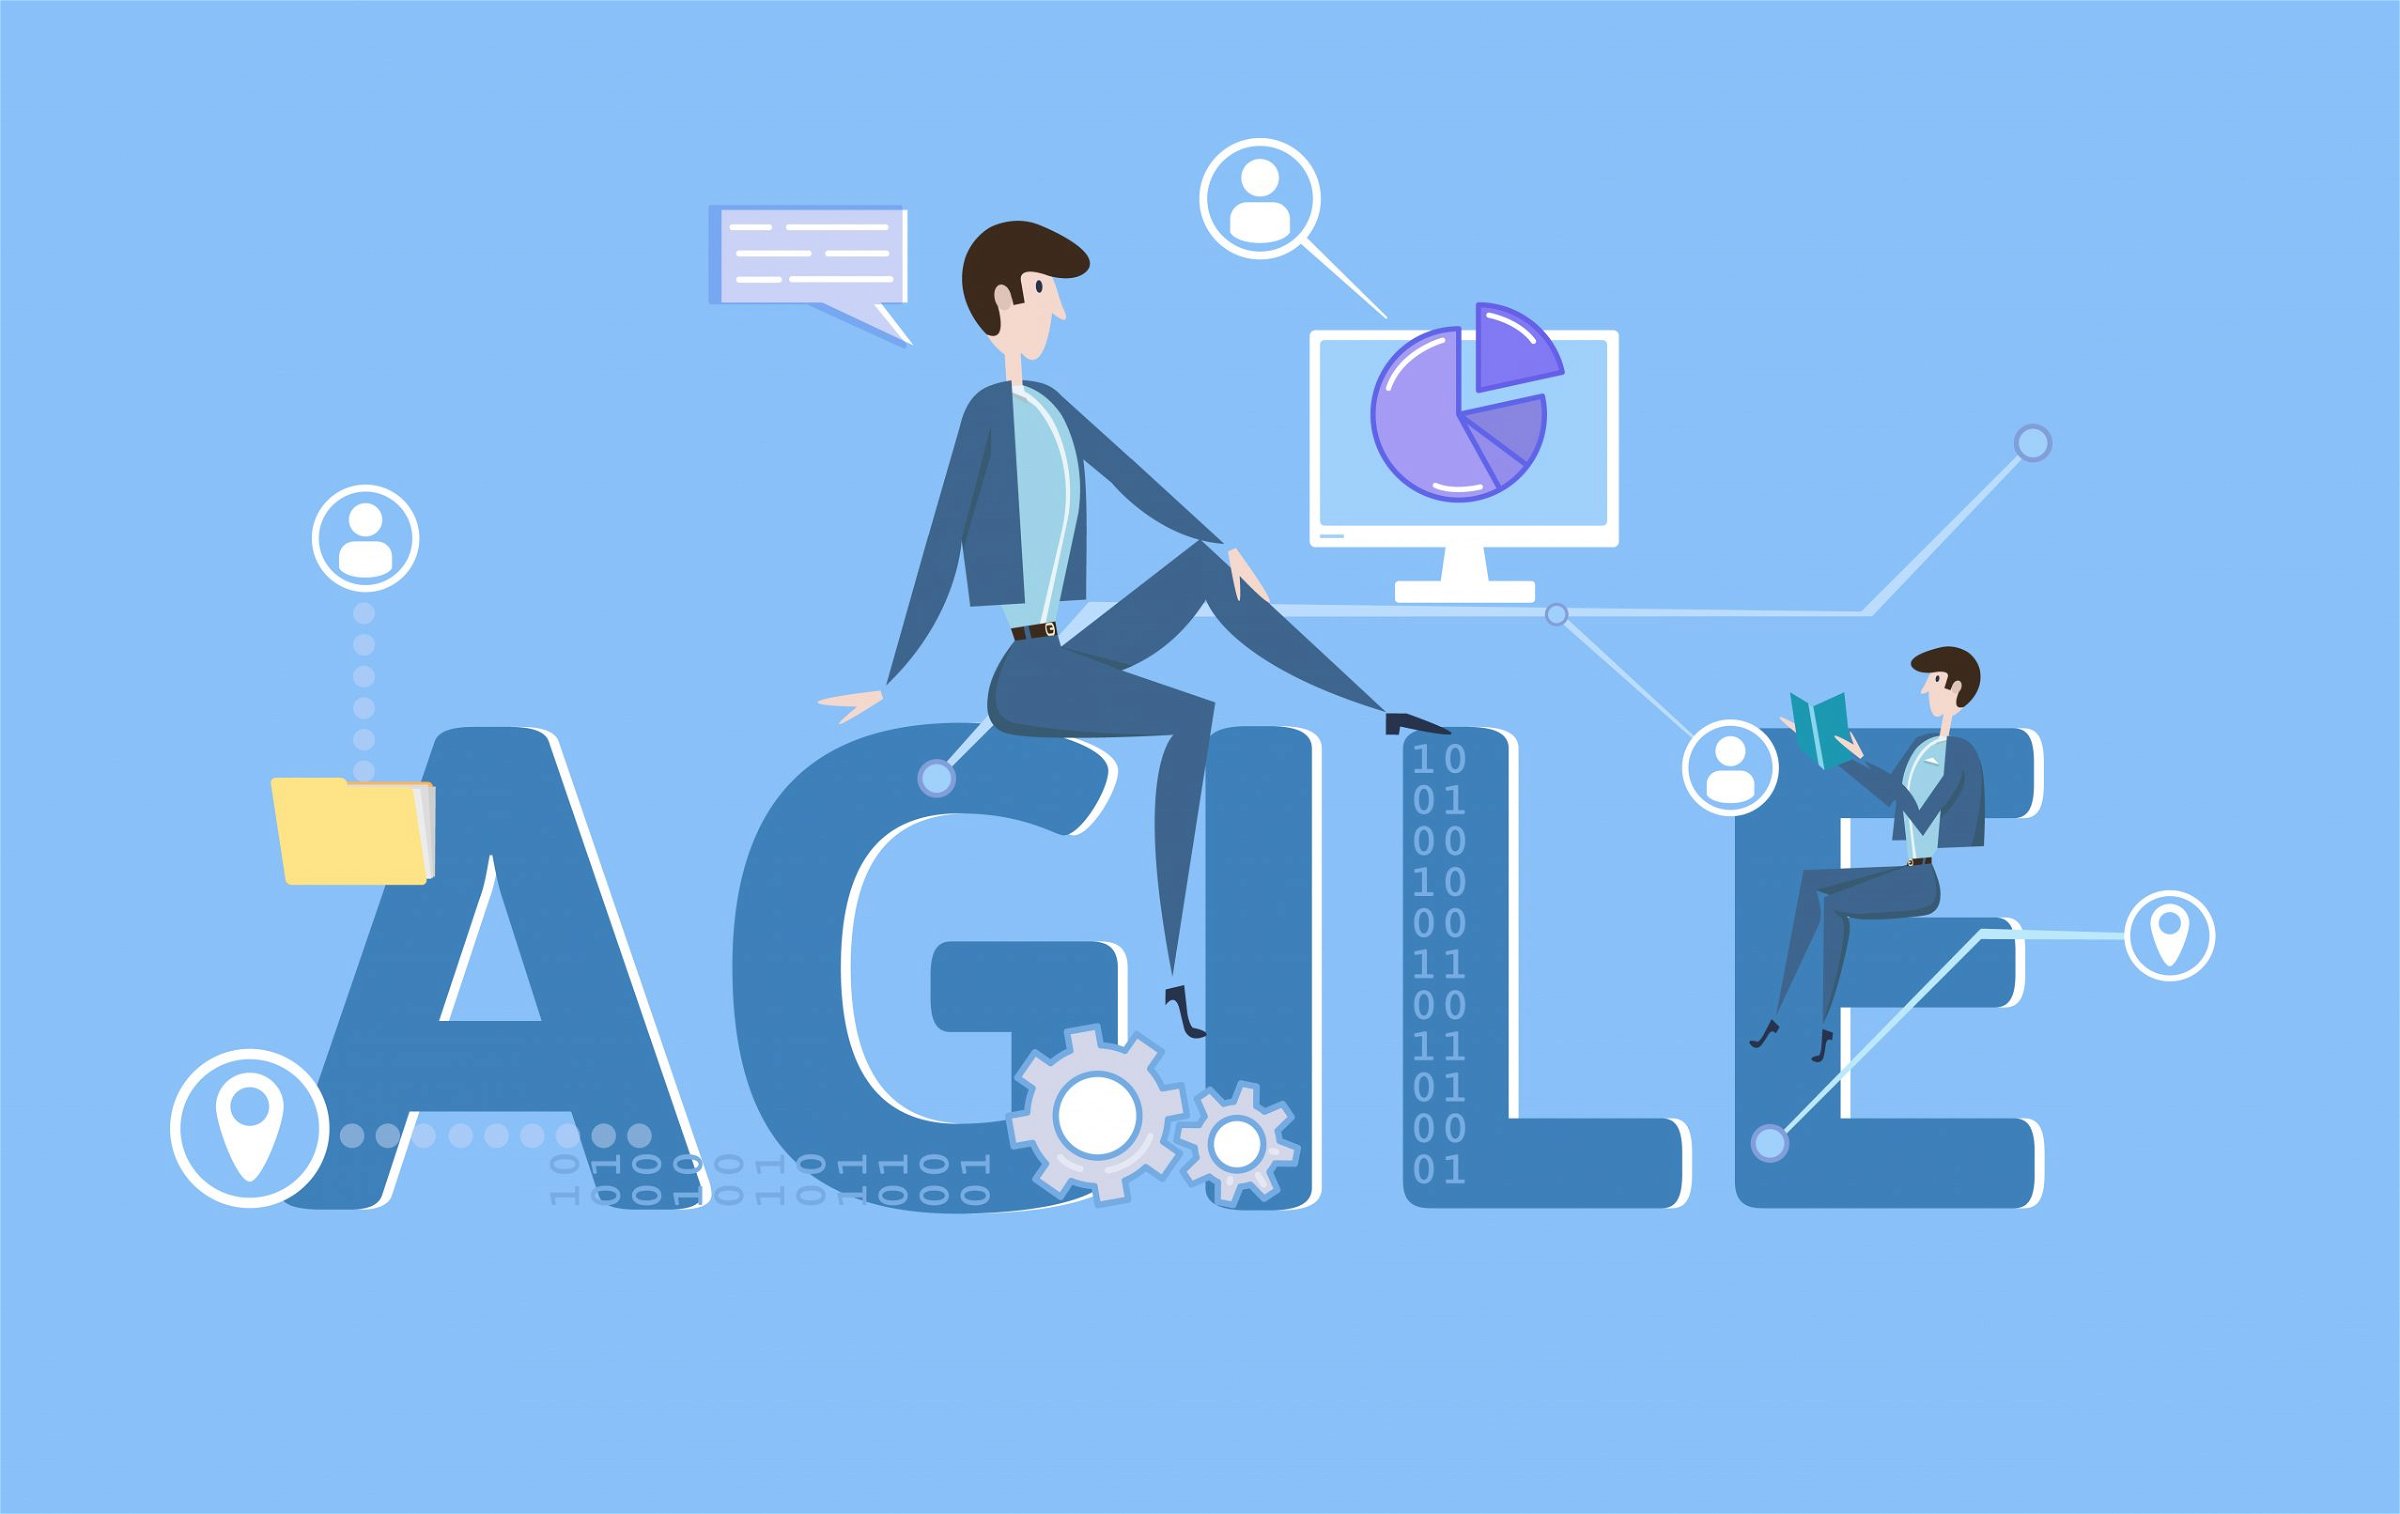 How Long Does It Take to Get Agile Certification